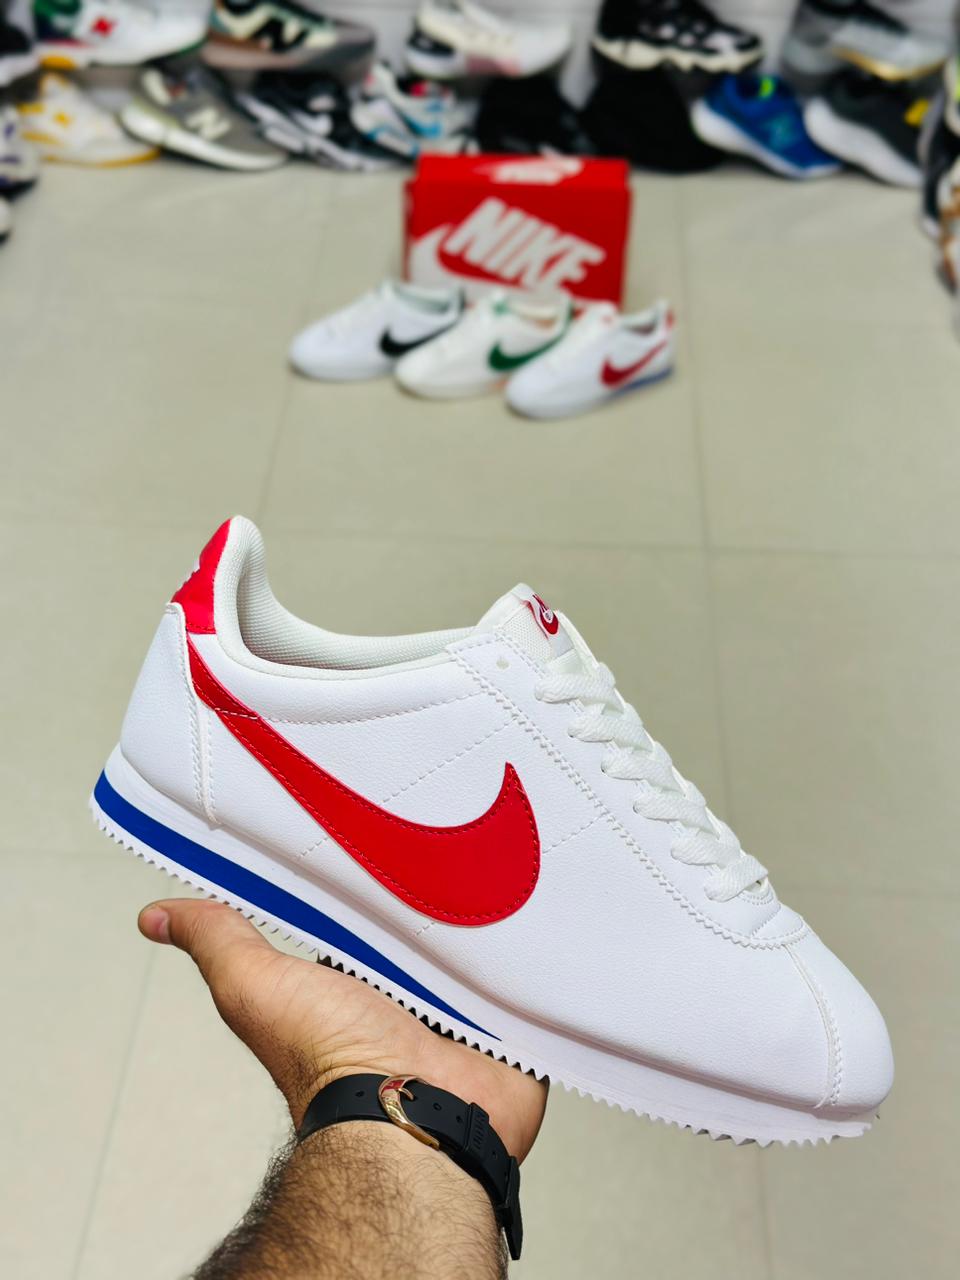 Nike Air First copy Classic Cortez Leather Shoes White/ Red